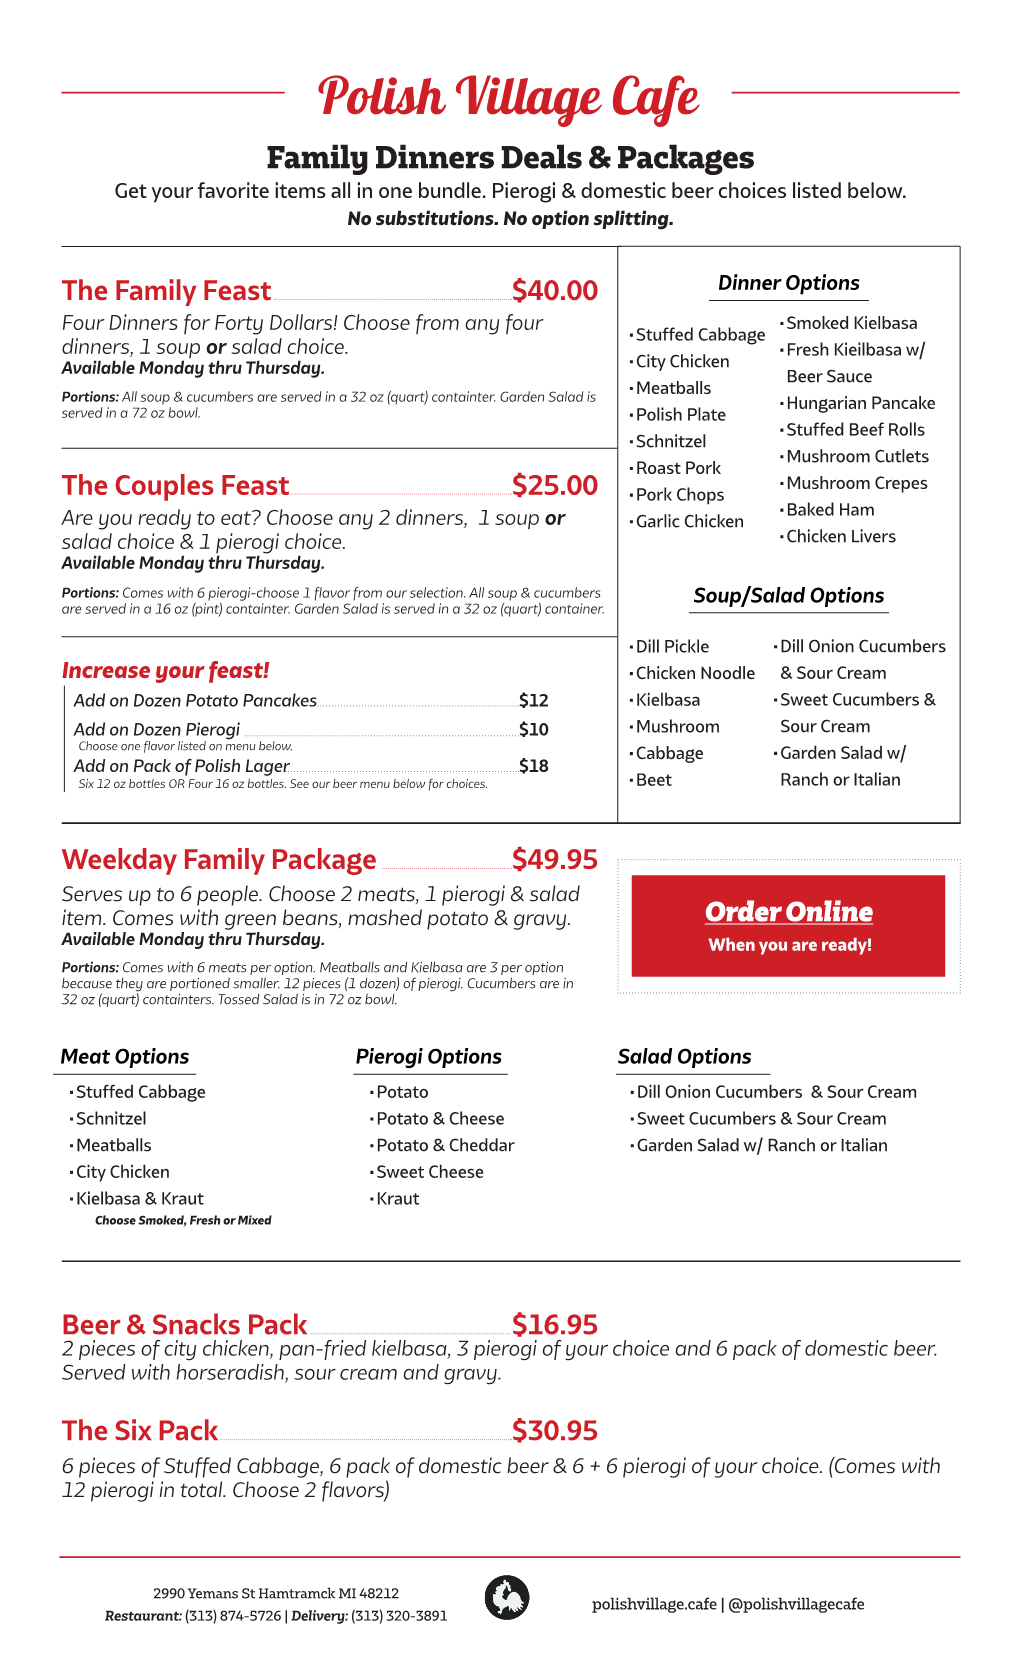 Polish Village Cafe Family Dinners Deals & Packages Get Your Favorite Items All in One Bundle